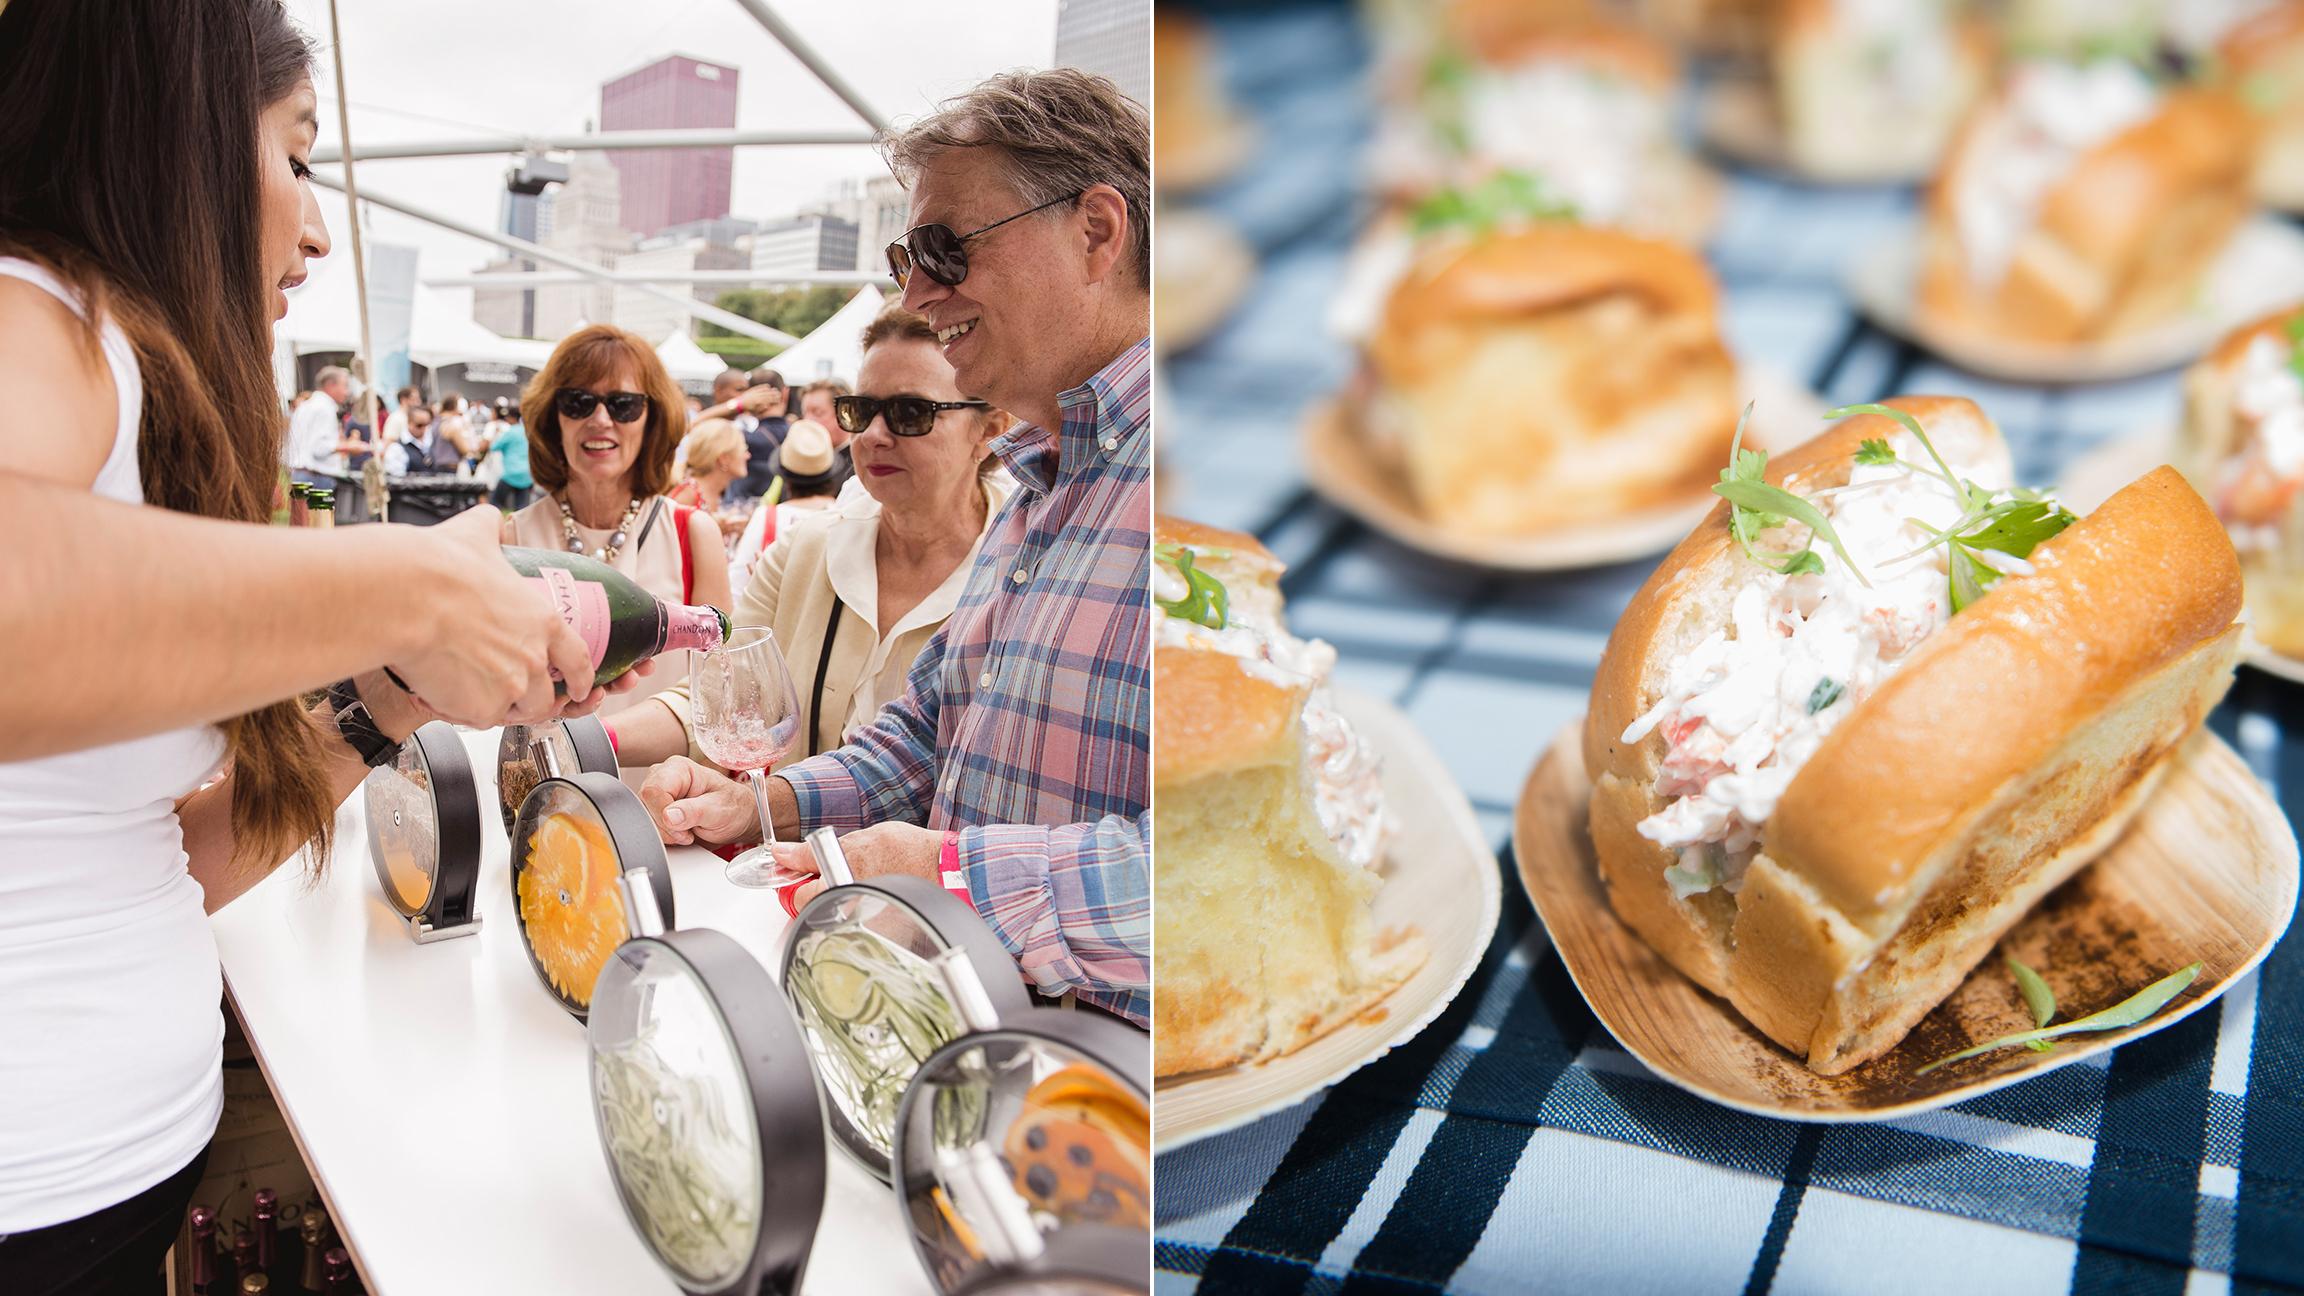 Chicago Gourmet attendees in 2015 enjoy Champagne, left, and Maine lobster rolls. (Photos by Nathanael Filbert, left, Beking Joassaint / Courtesy of Chicago Gourmet)